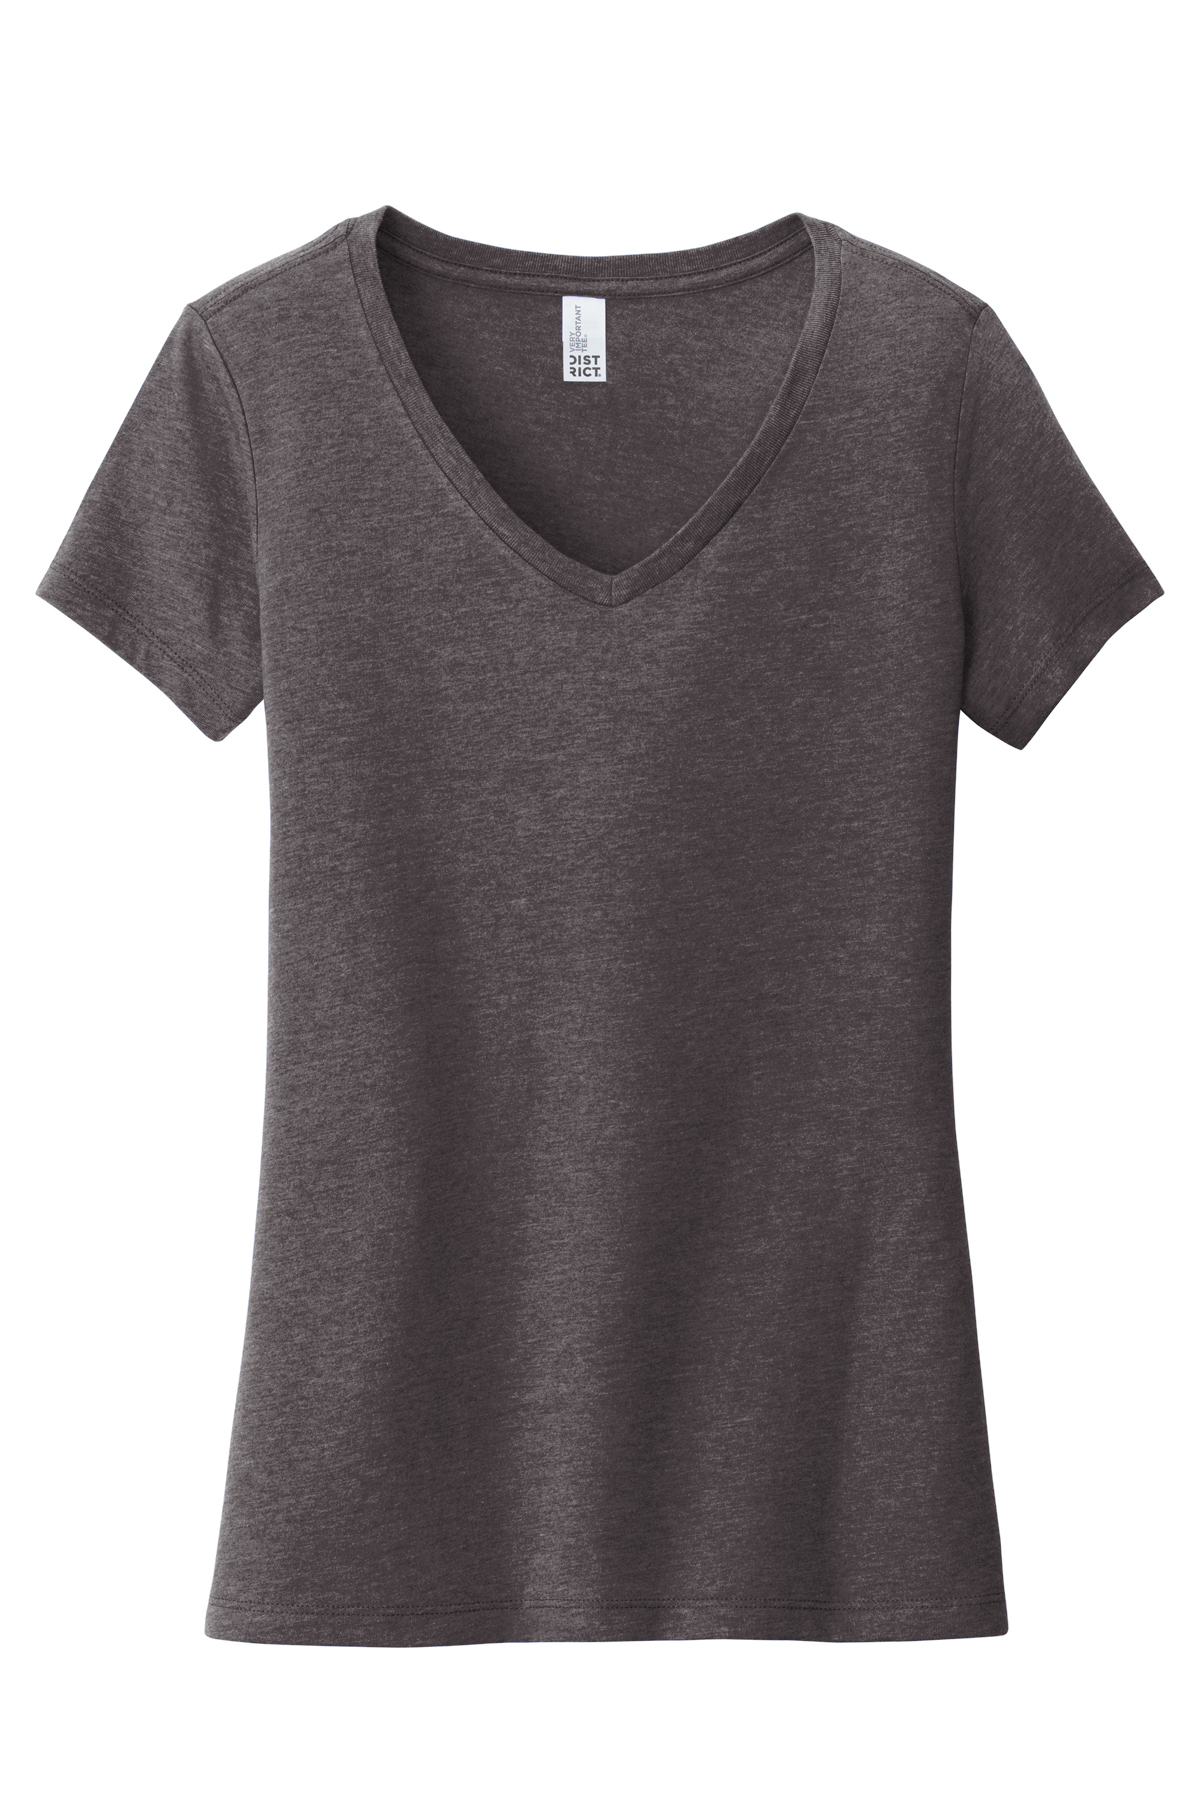 District Women’s Very Important Tee V-Neck | Product | Company Casuals